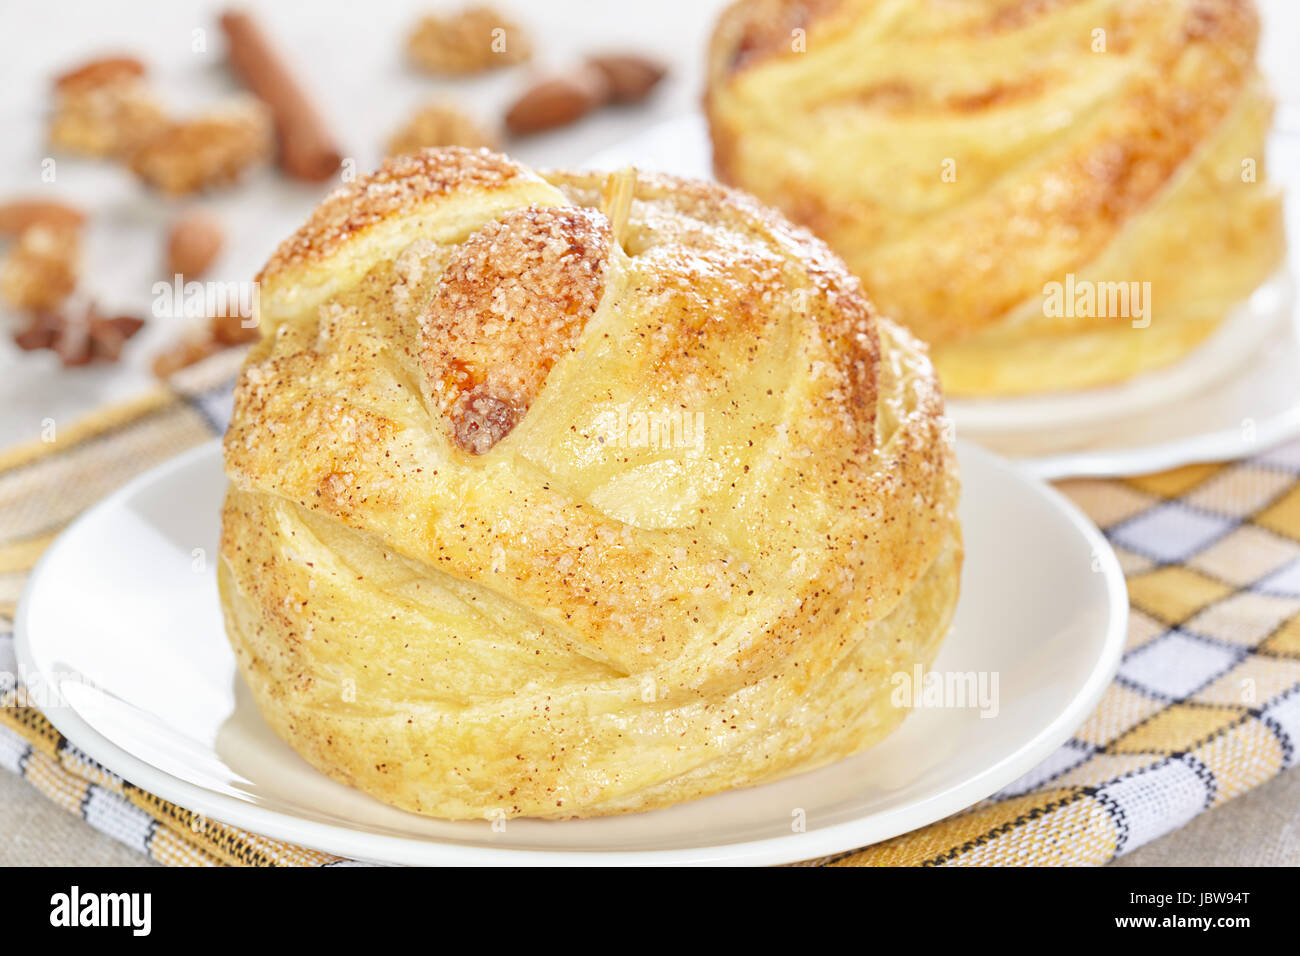 Apples baked in puff pastry Stock Photo